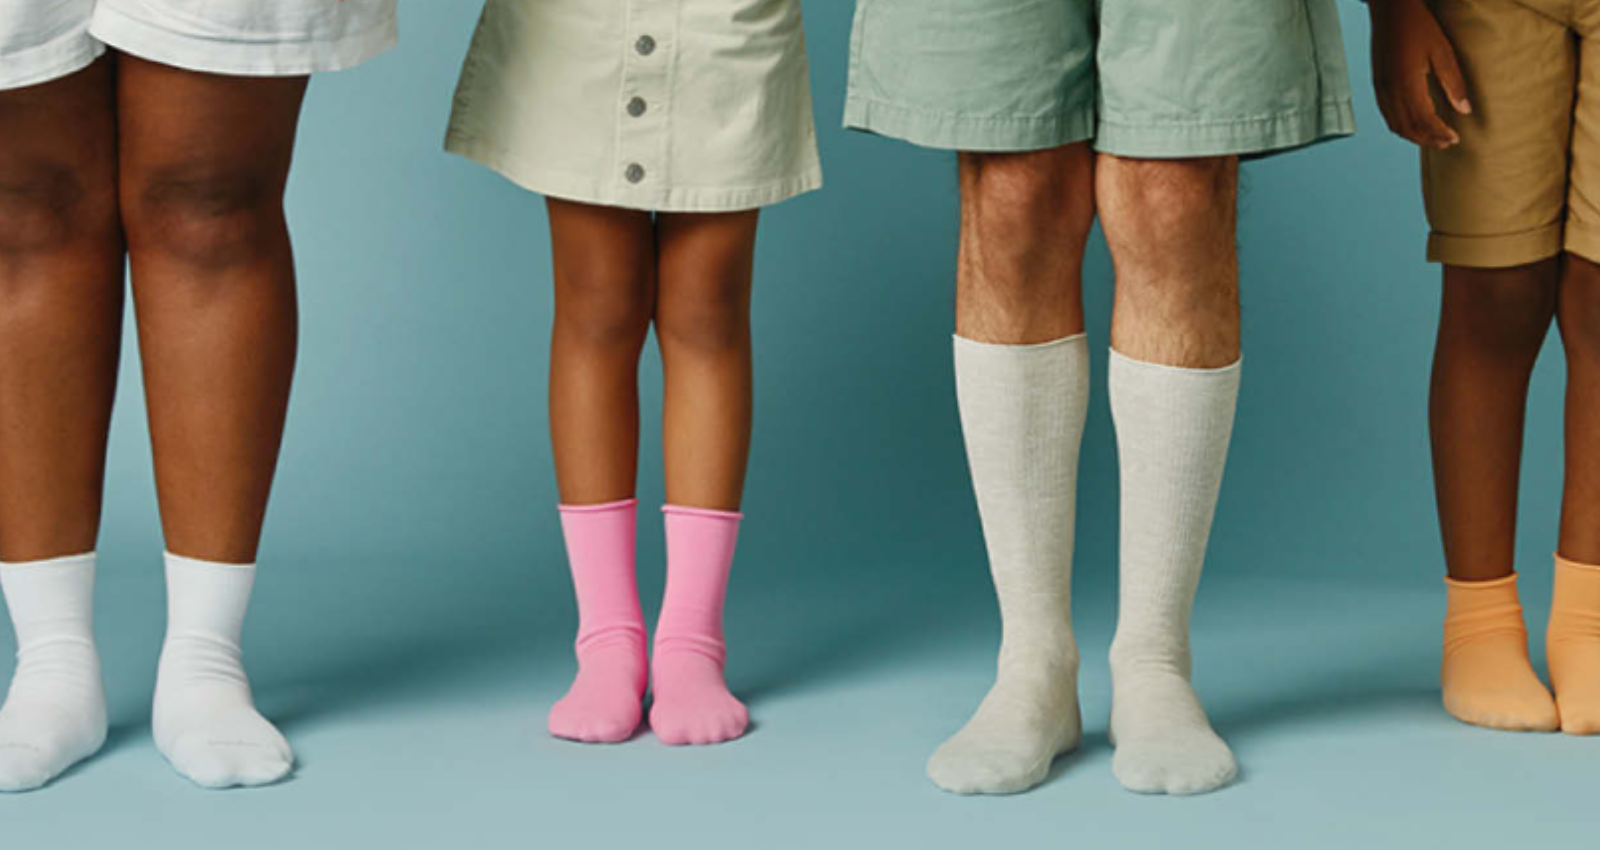 four people standing with just legs showing, wearing socks.